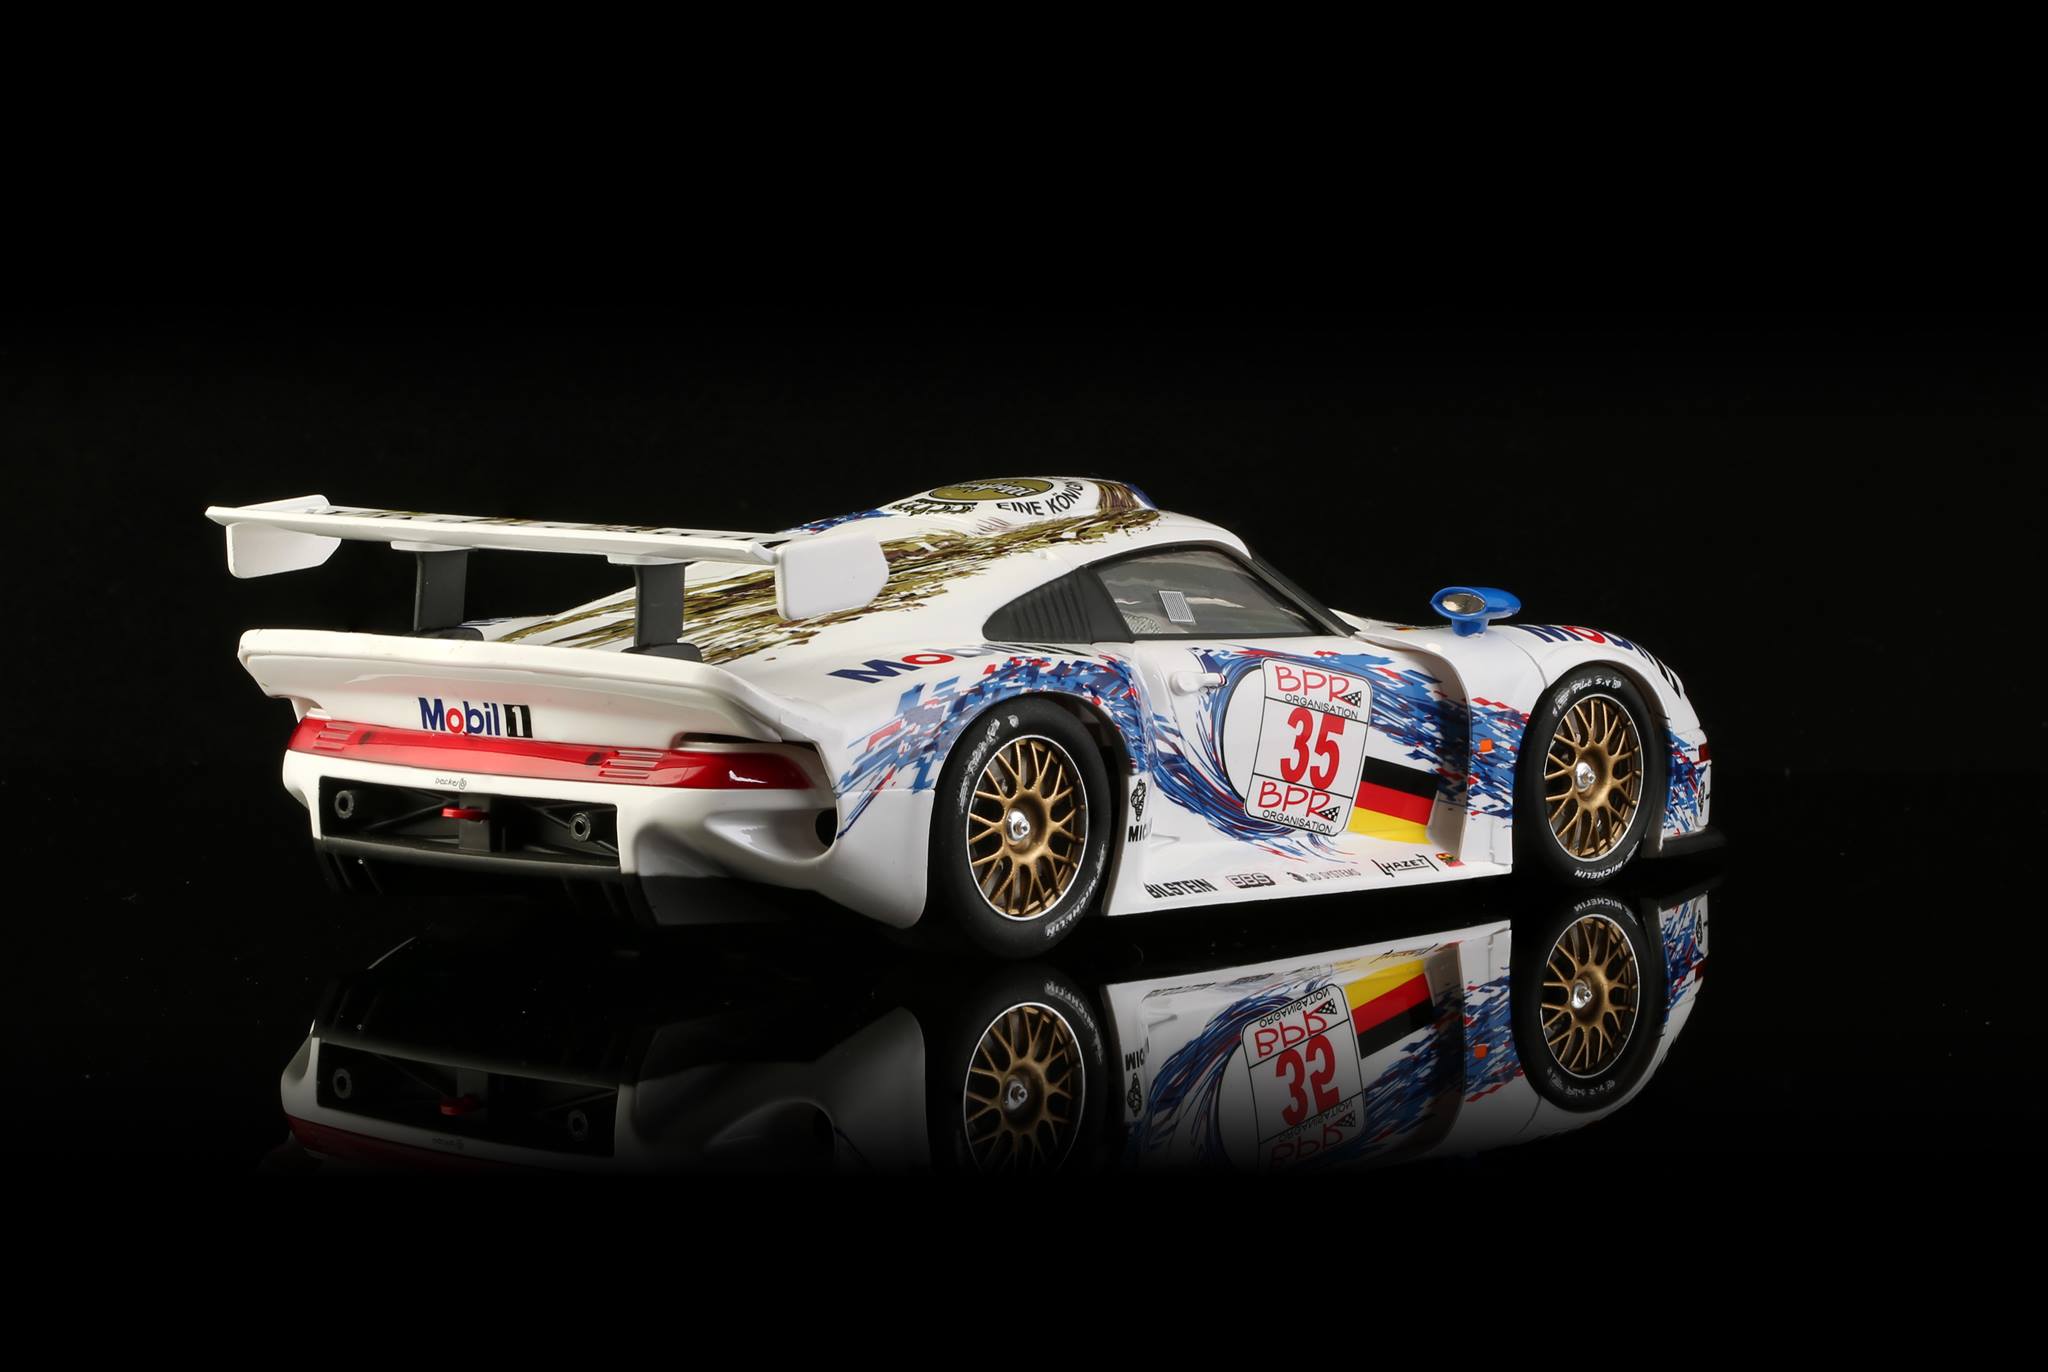 BRM045 Porsche 911 GT1 TEAM Mobil #35 with aluminum chassis